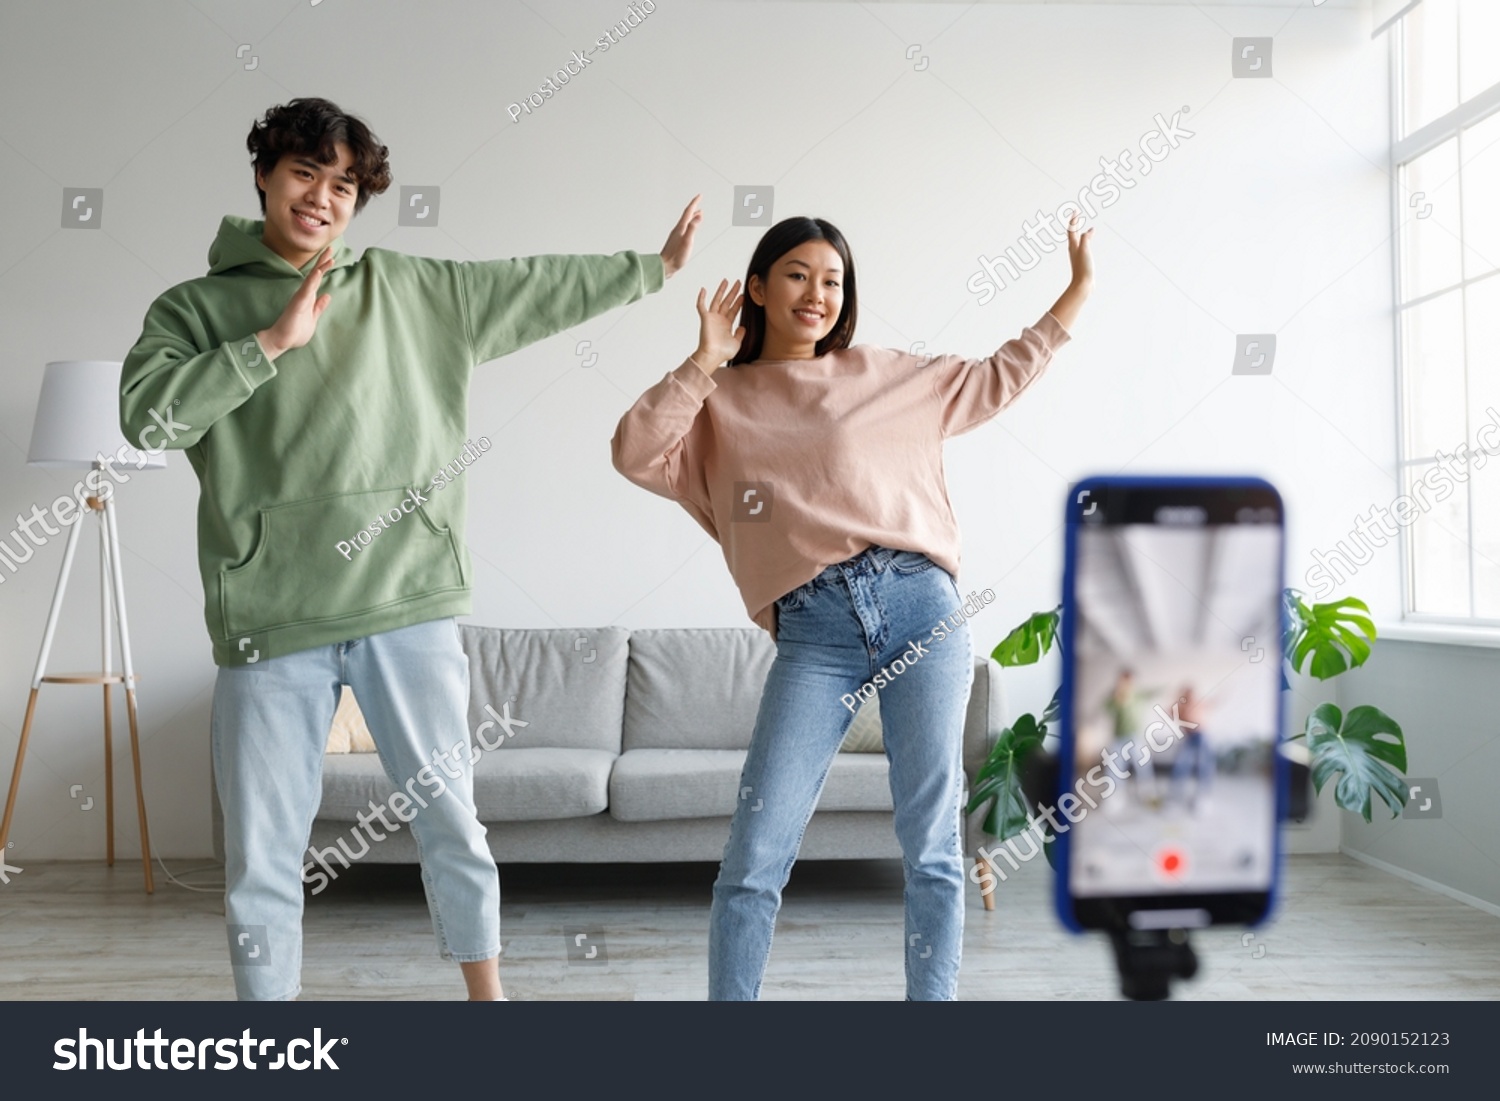 Young Asian couple recording video content, dancing on smartphone camera at home. Positive millennial boyfriend and girlfriend filming for social media, using mobile device. Vlogging concept #2090152123